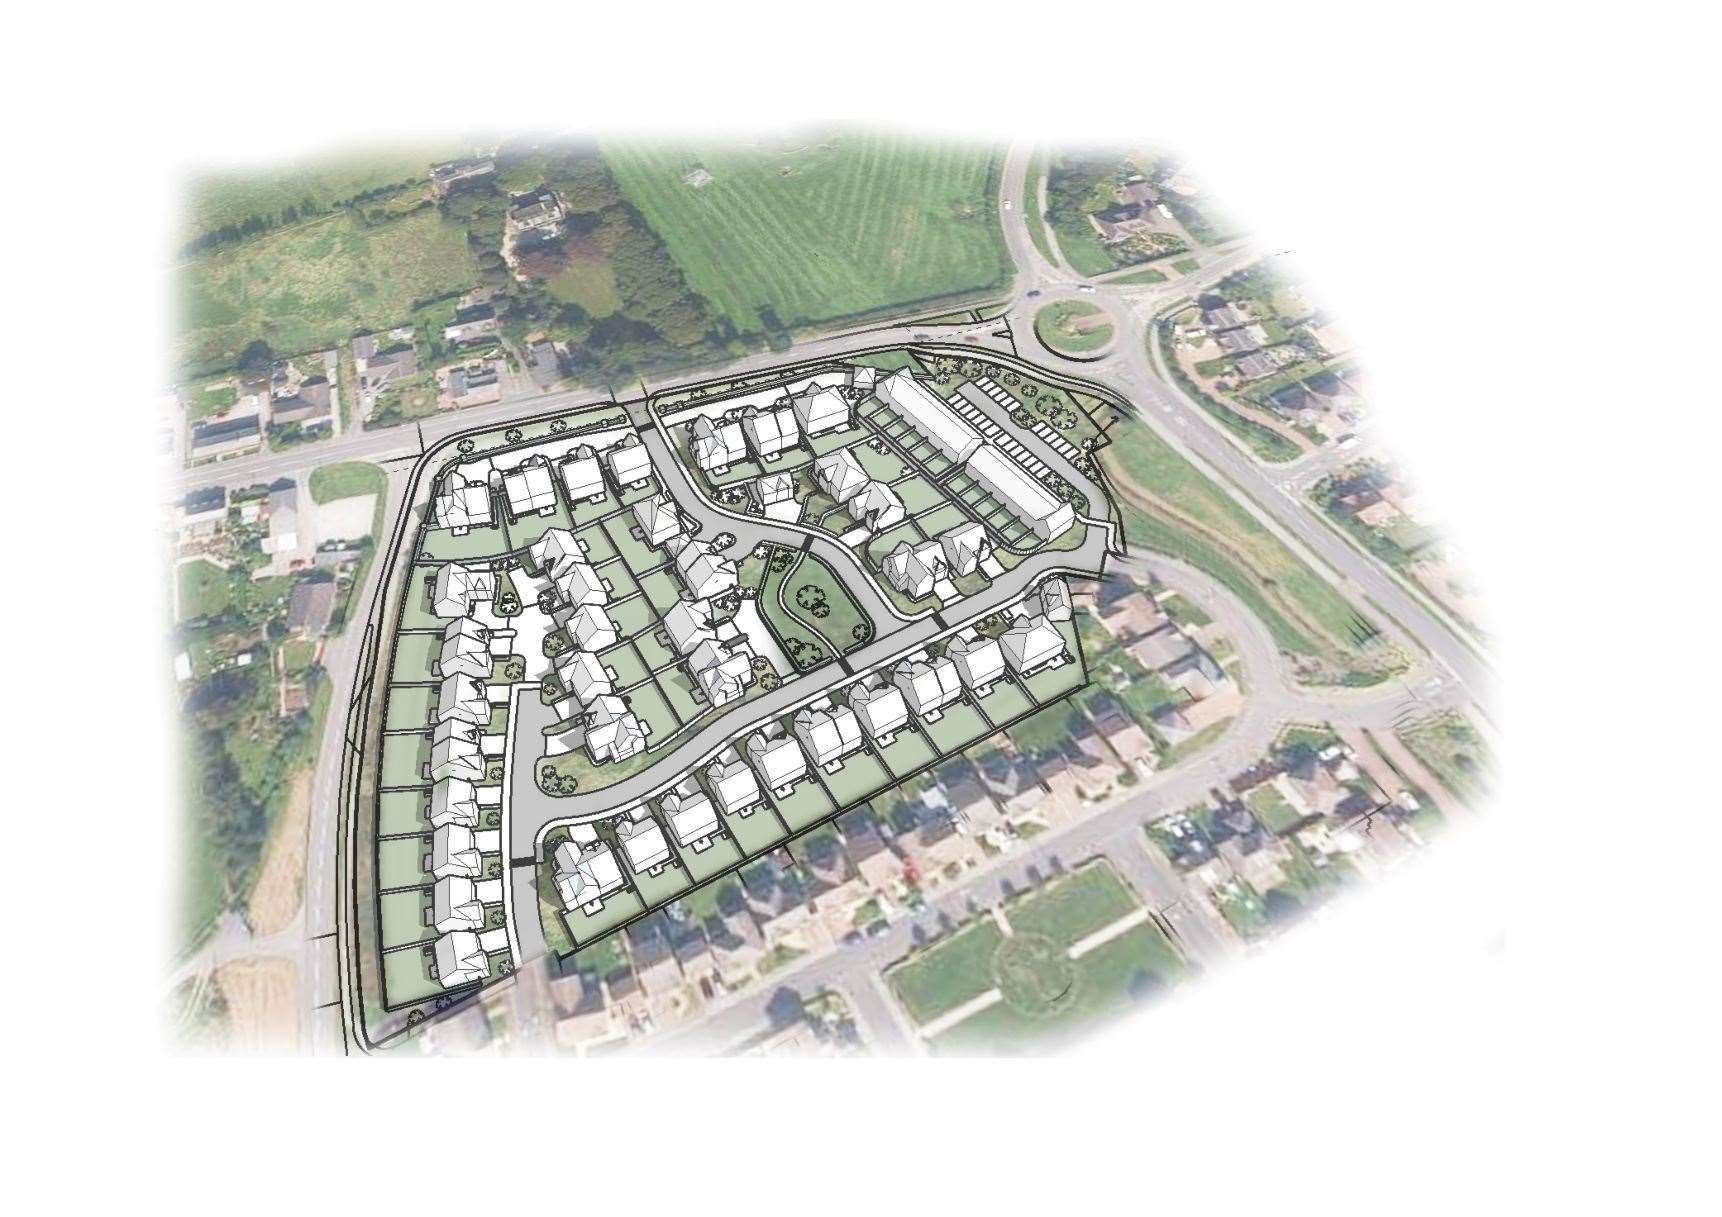 An aerial view of the proposed housing development for Westhill.